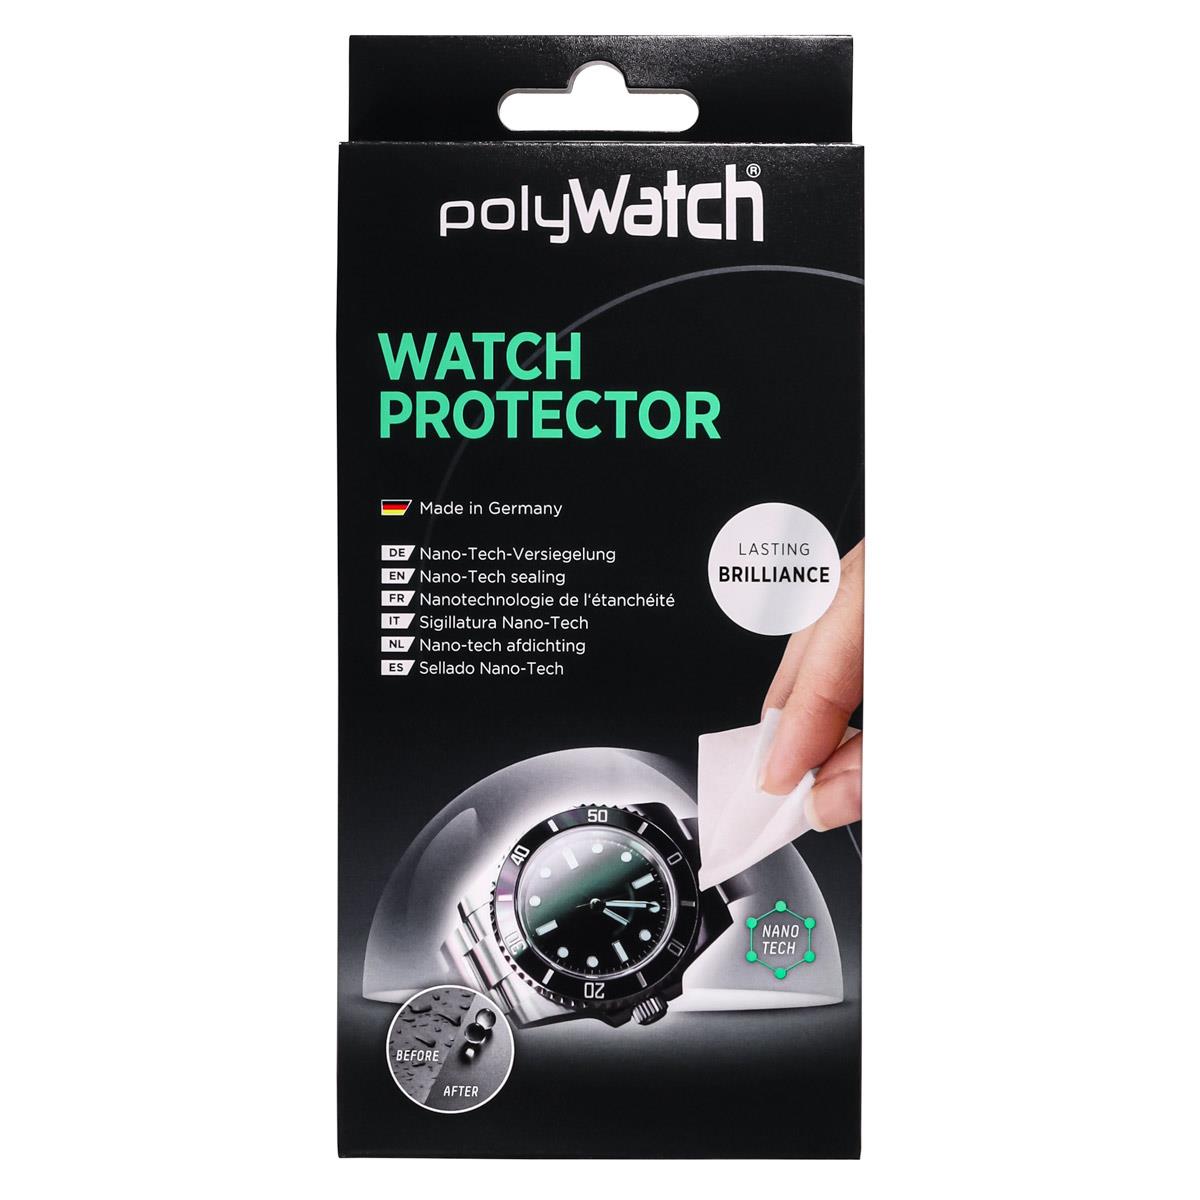 PolyWatch Protector